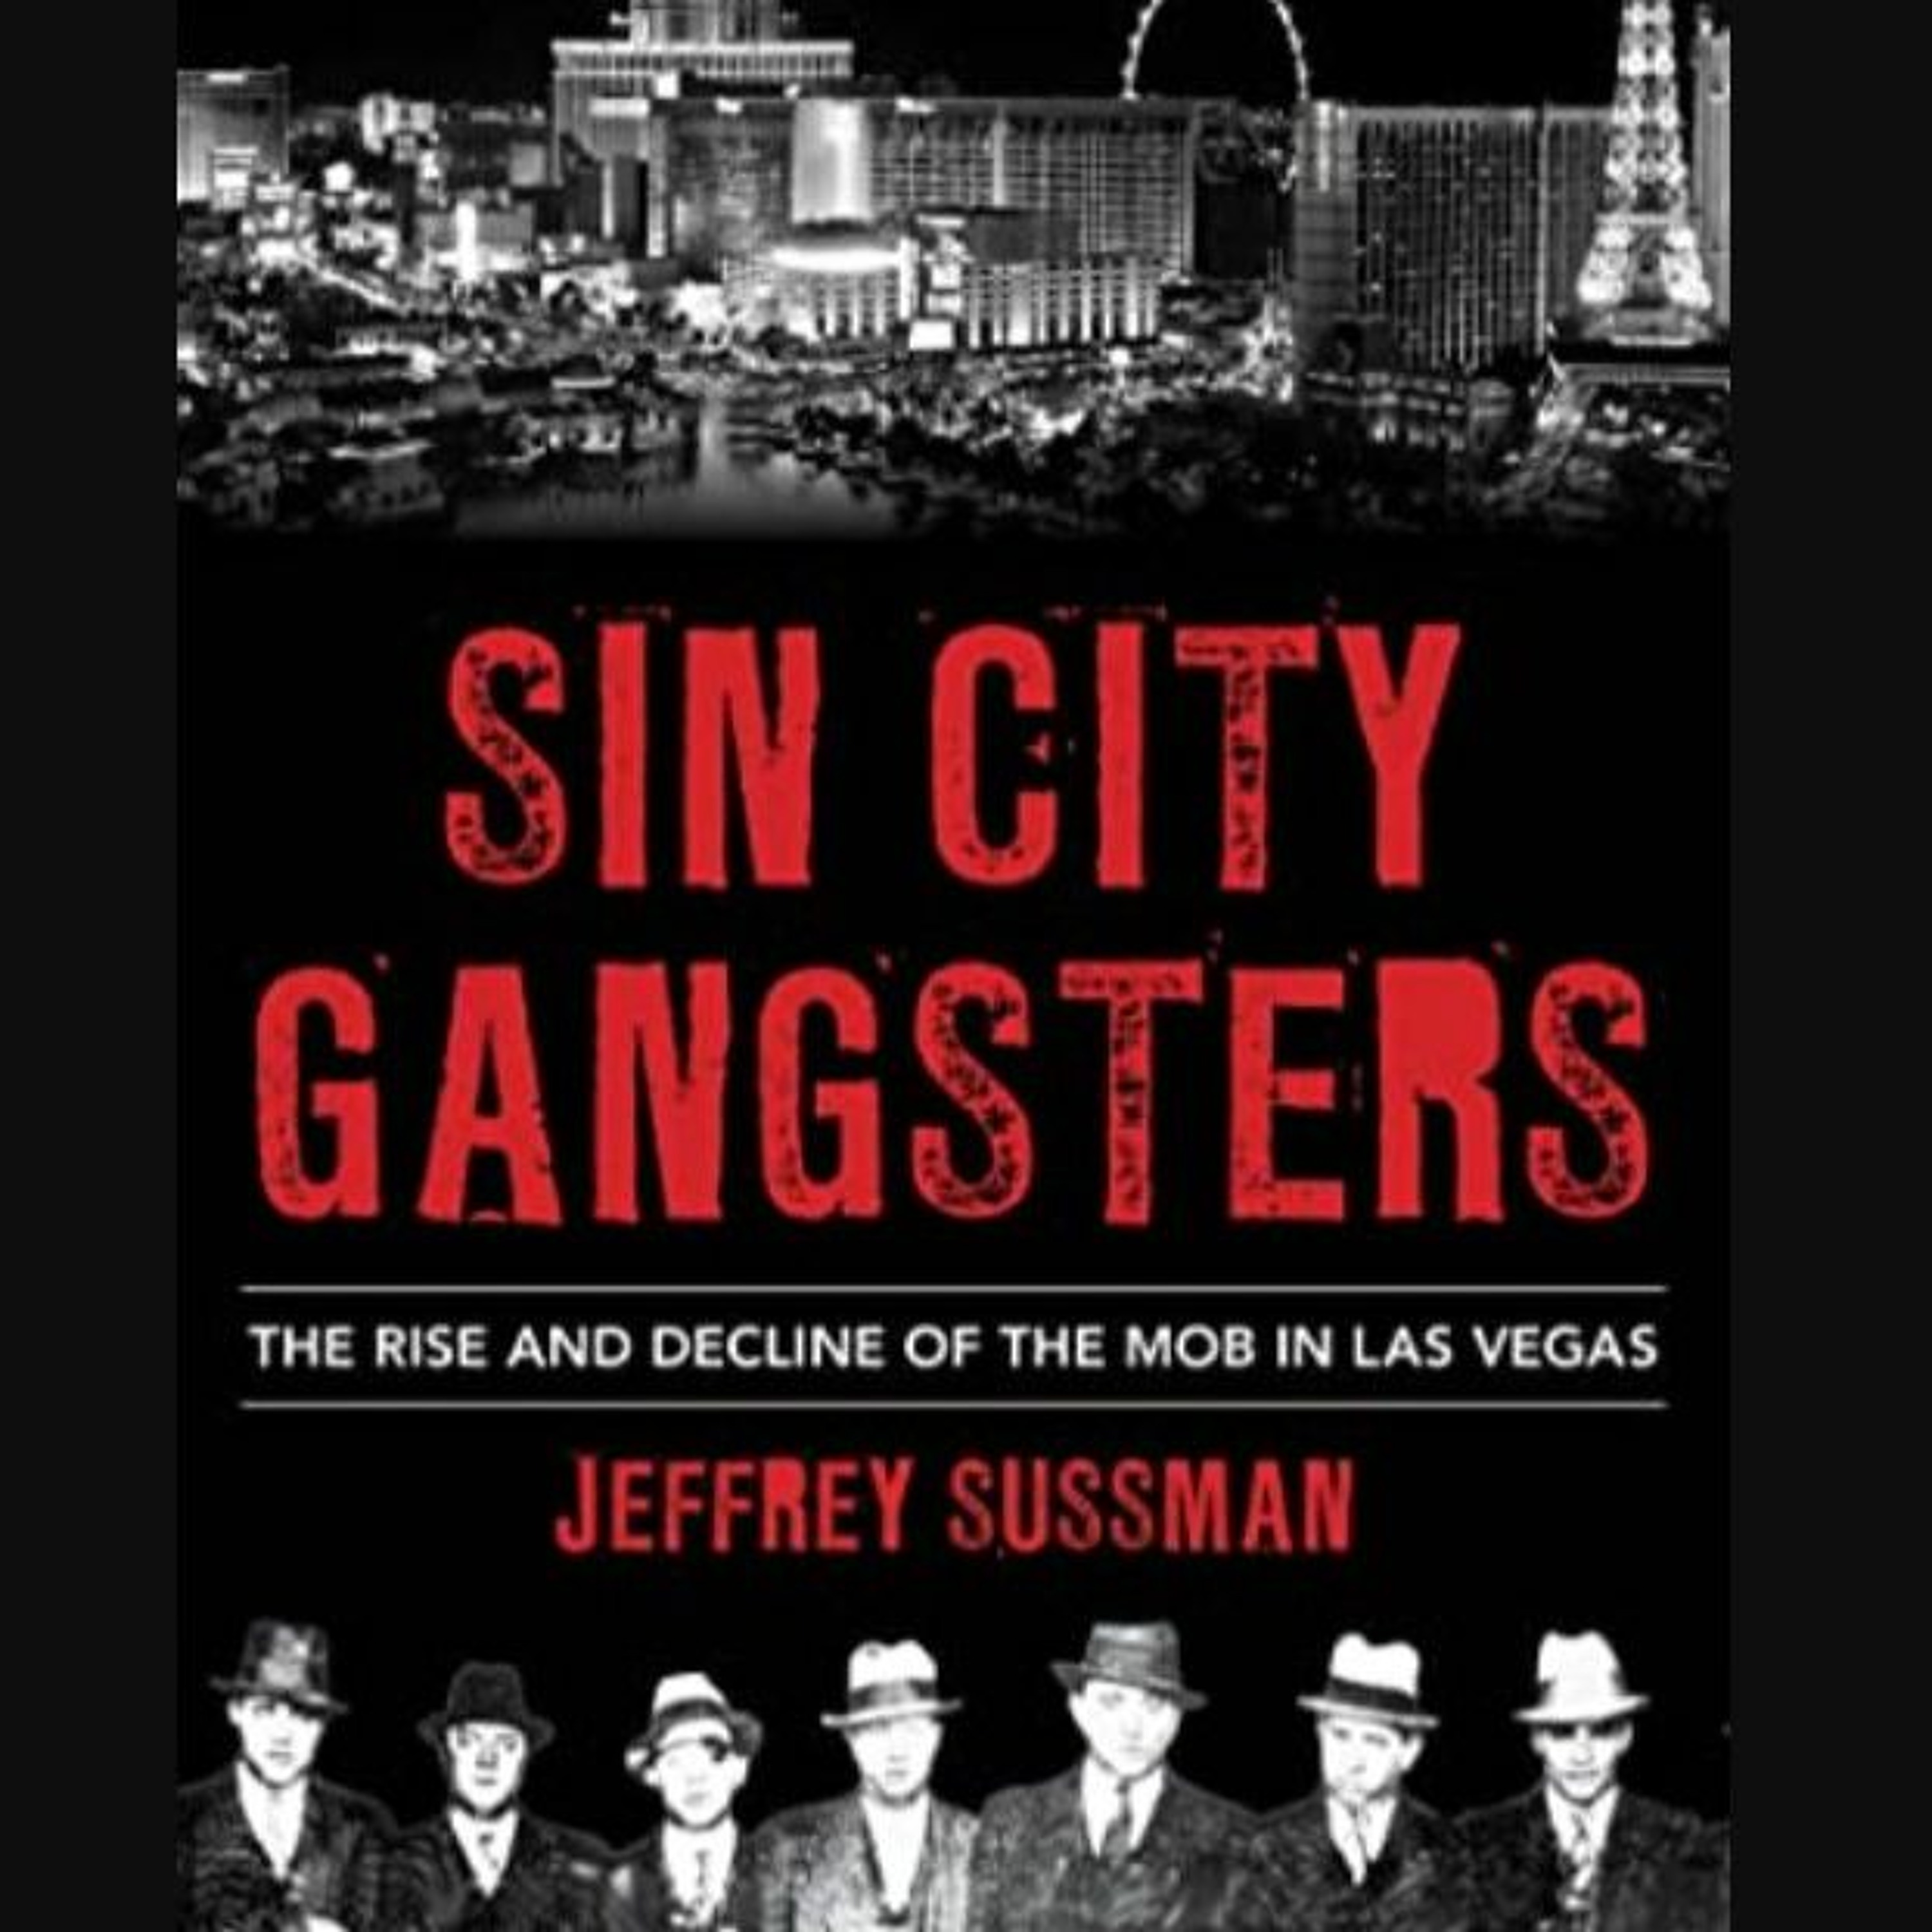 ”Sin City Gangsters” - The Jeffrey Sussman Interview